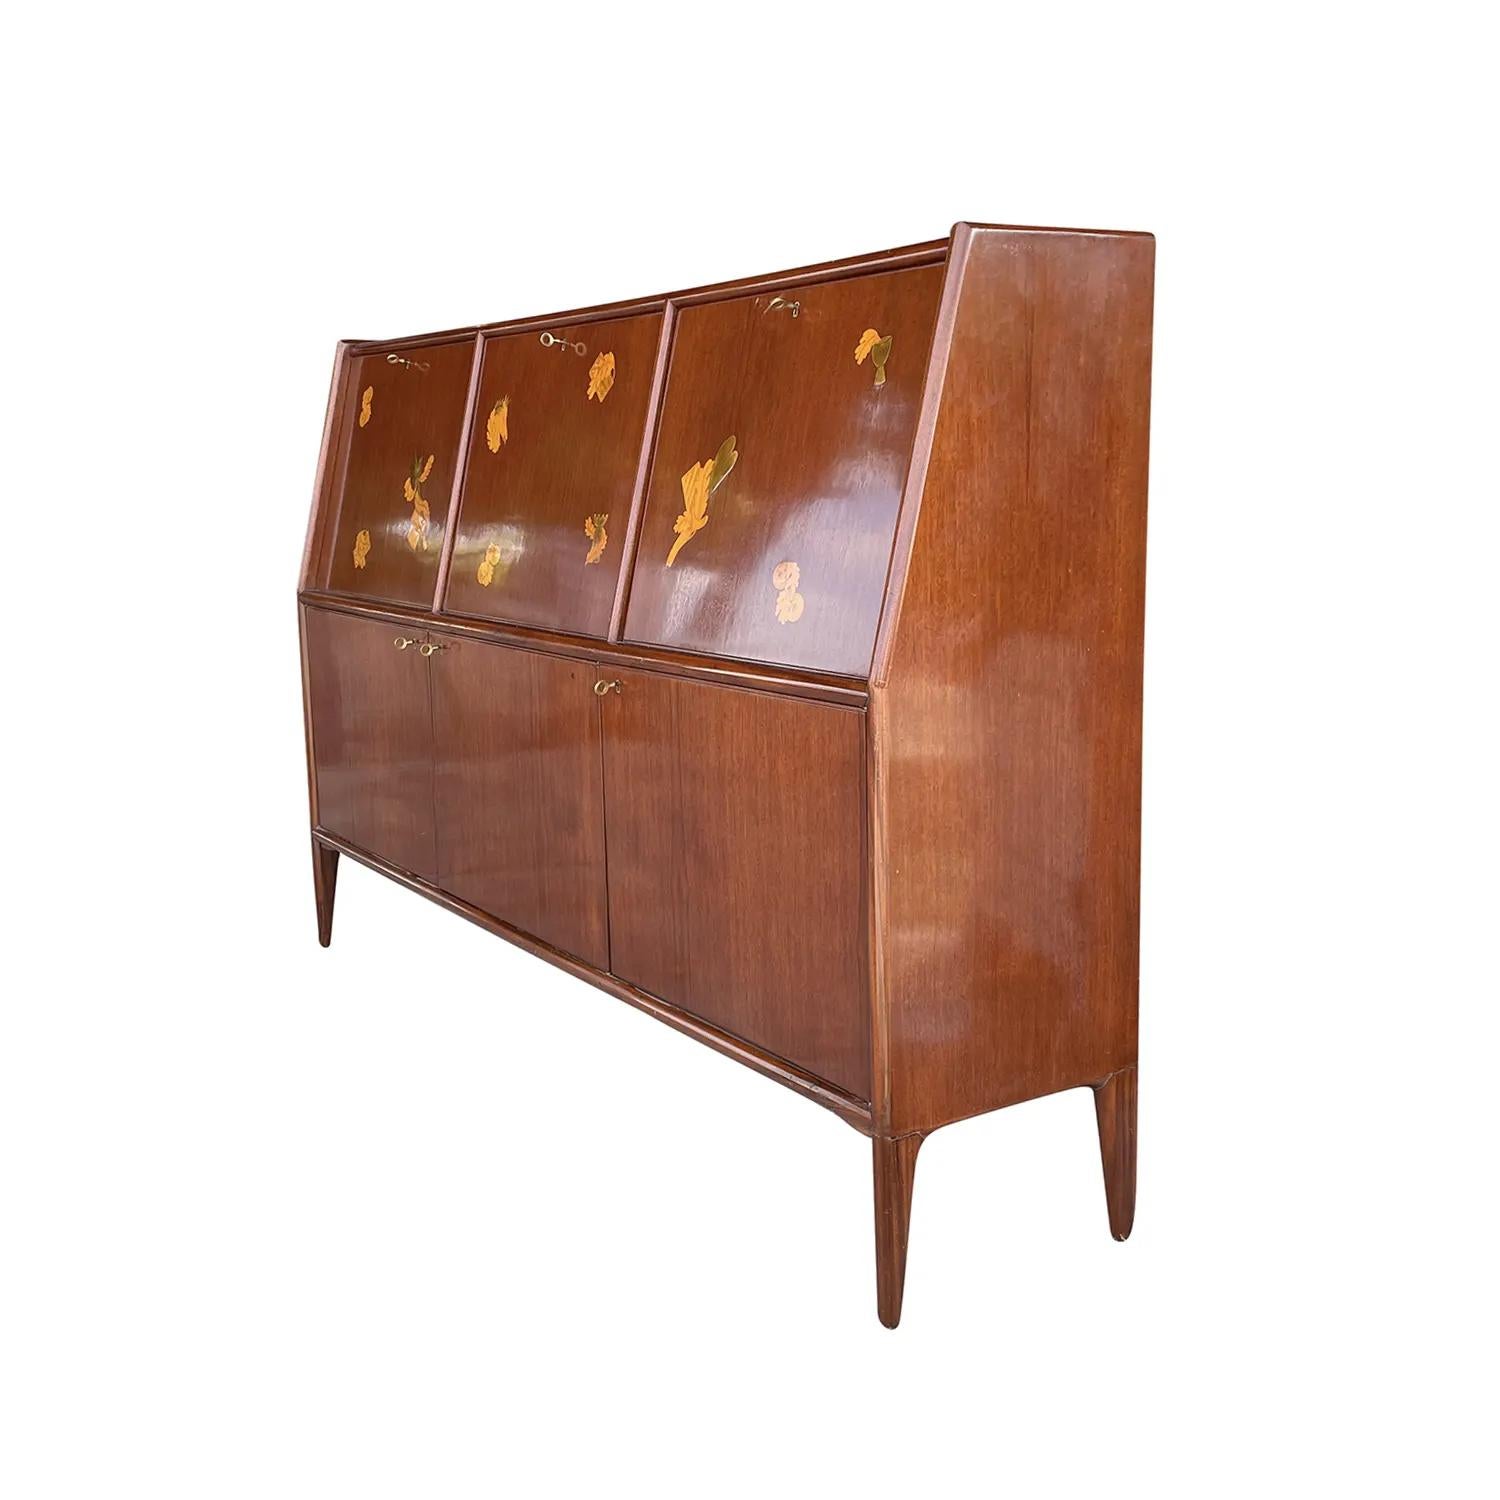 A light-brown, large vintage Mid-Century Modern, finely worked Italian secretaire, designed by Paolo Buffa and Giovanni Gariboldi in good condition. The inlays of the large rectangular writing desk, table is made of hand carved Rosewood, the